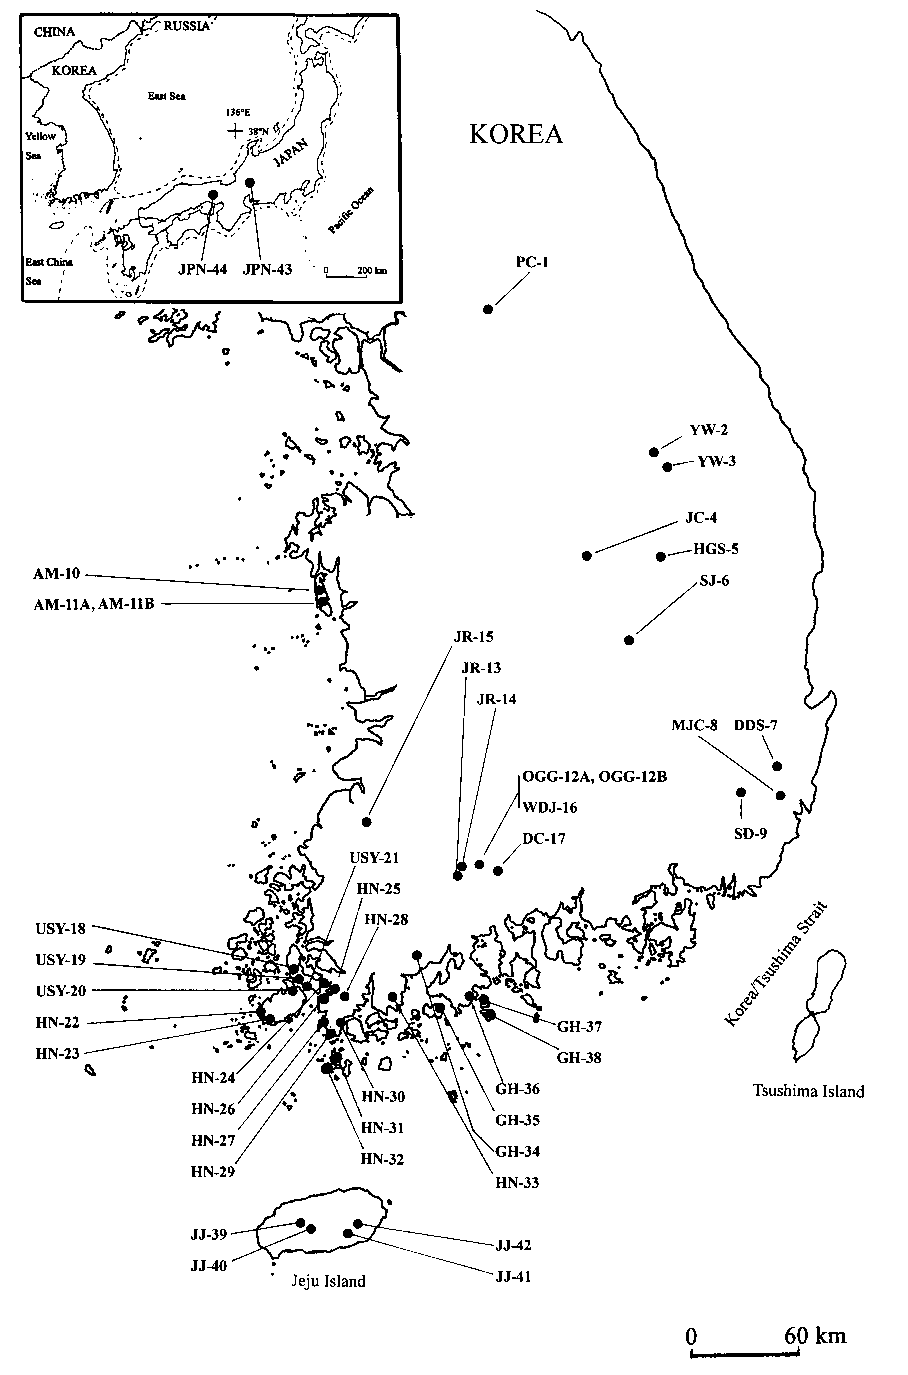 Map showing locations of the 44 locations where the six terrestrial orchid species occurring or co-occurring in Korea and Japan (Epipactis thunbergii was only collected from Japan, JPN-43 and JPN-44, whereas other species from Korea). Dotted line in the insert indicates exposed coastal lines during the Last Glacial Maximum.